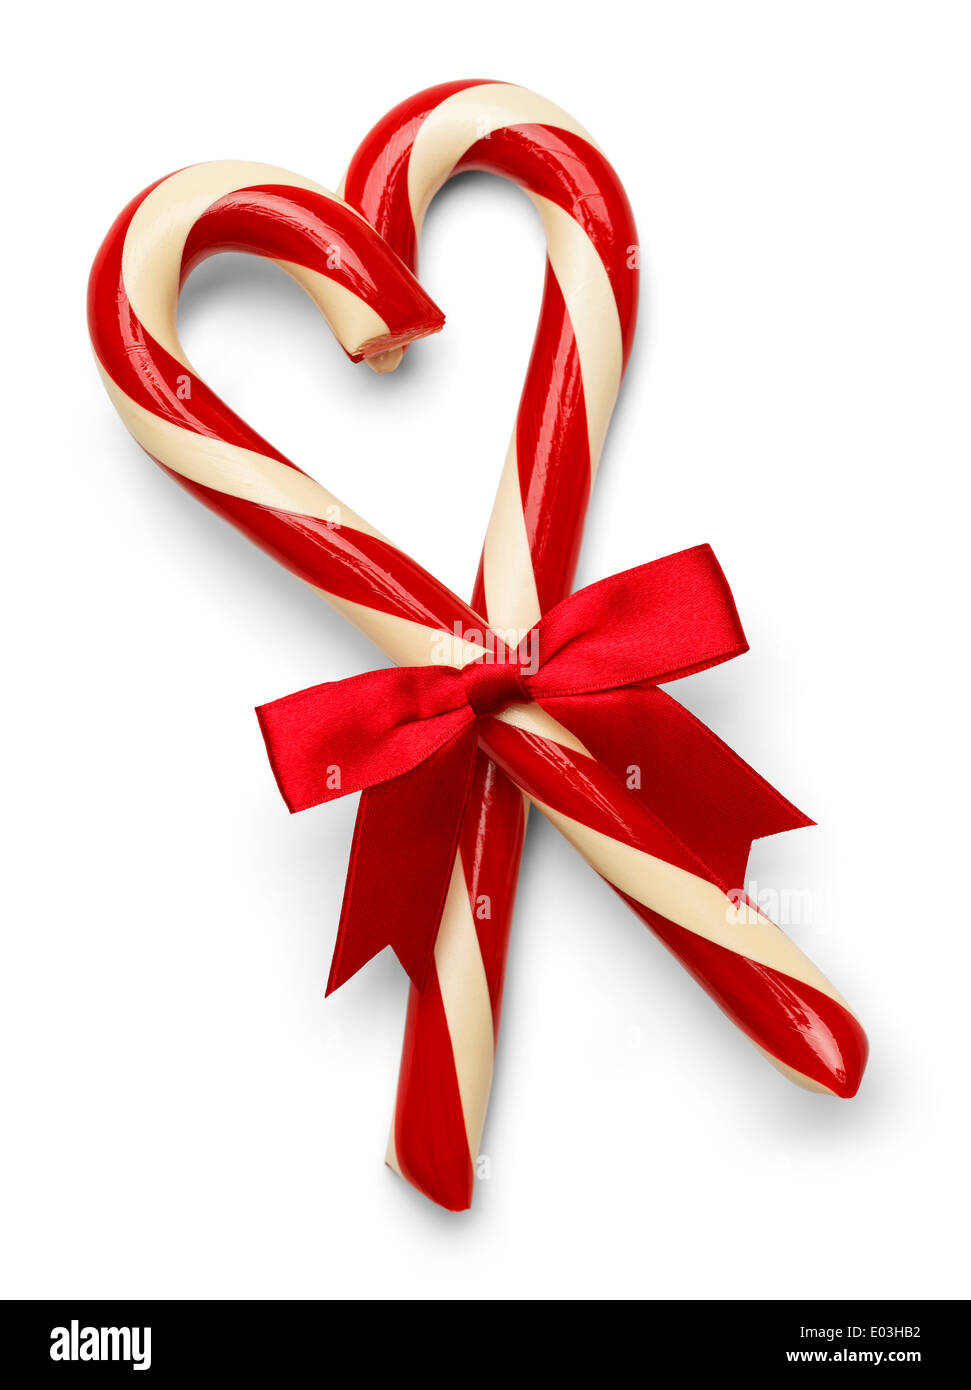 Two Candy Canes in Heart Shape with Red Bow Isolated on White Background. Stock Photo